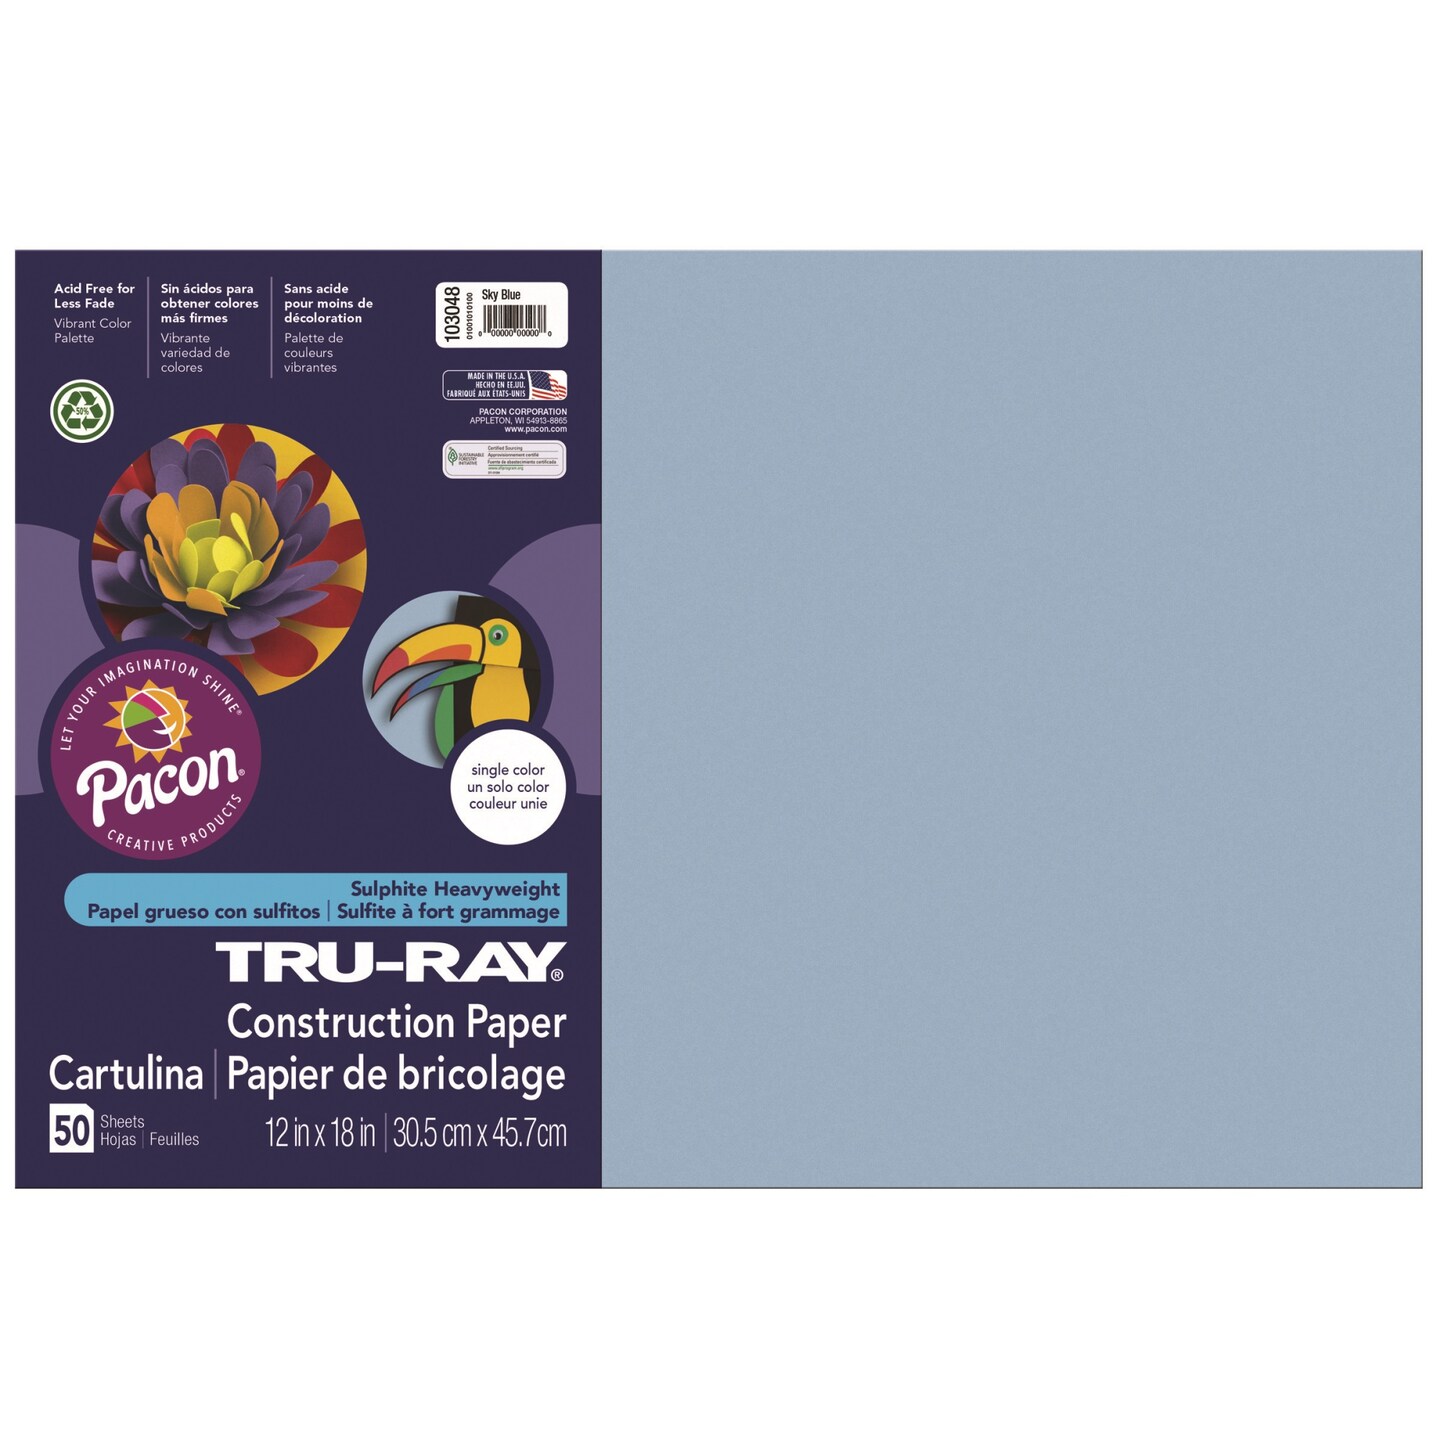 Crayola Construction Paper Shapes 9X12 48 Sheets-Multipack Of